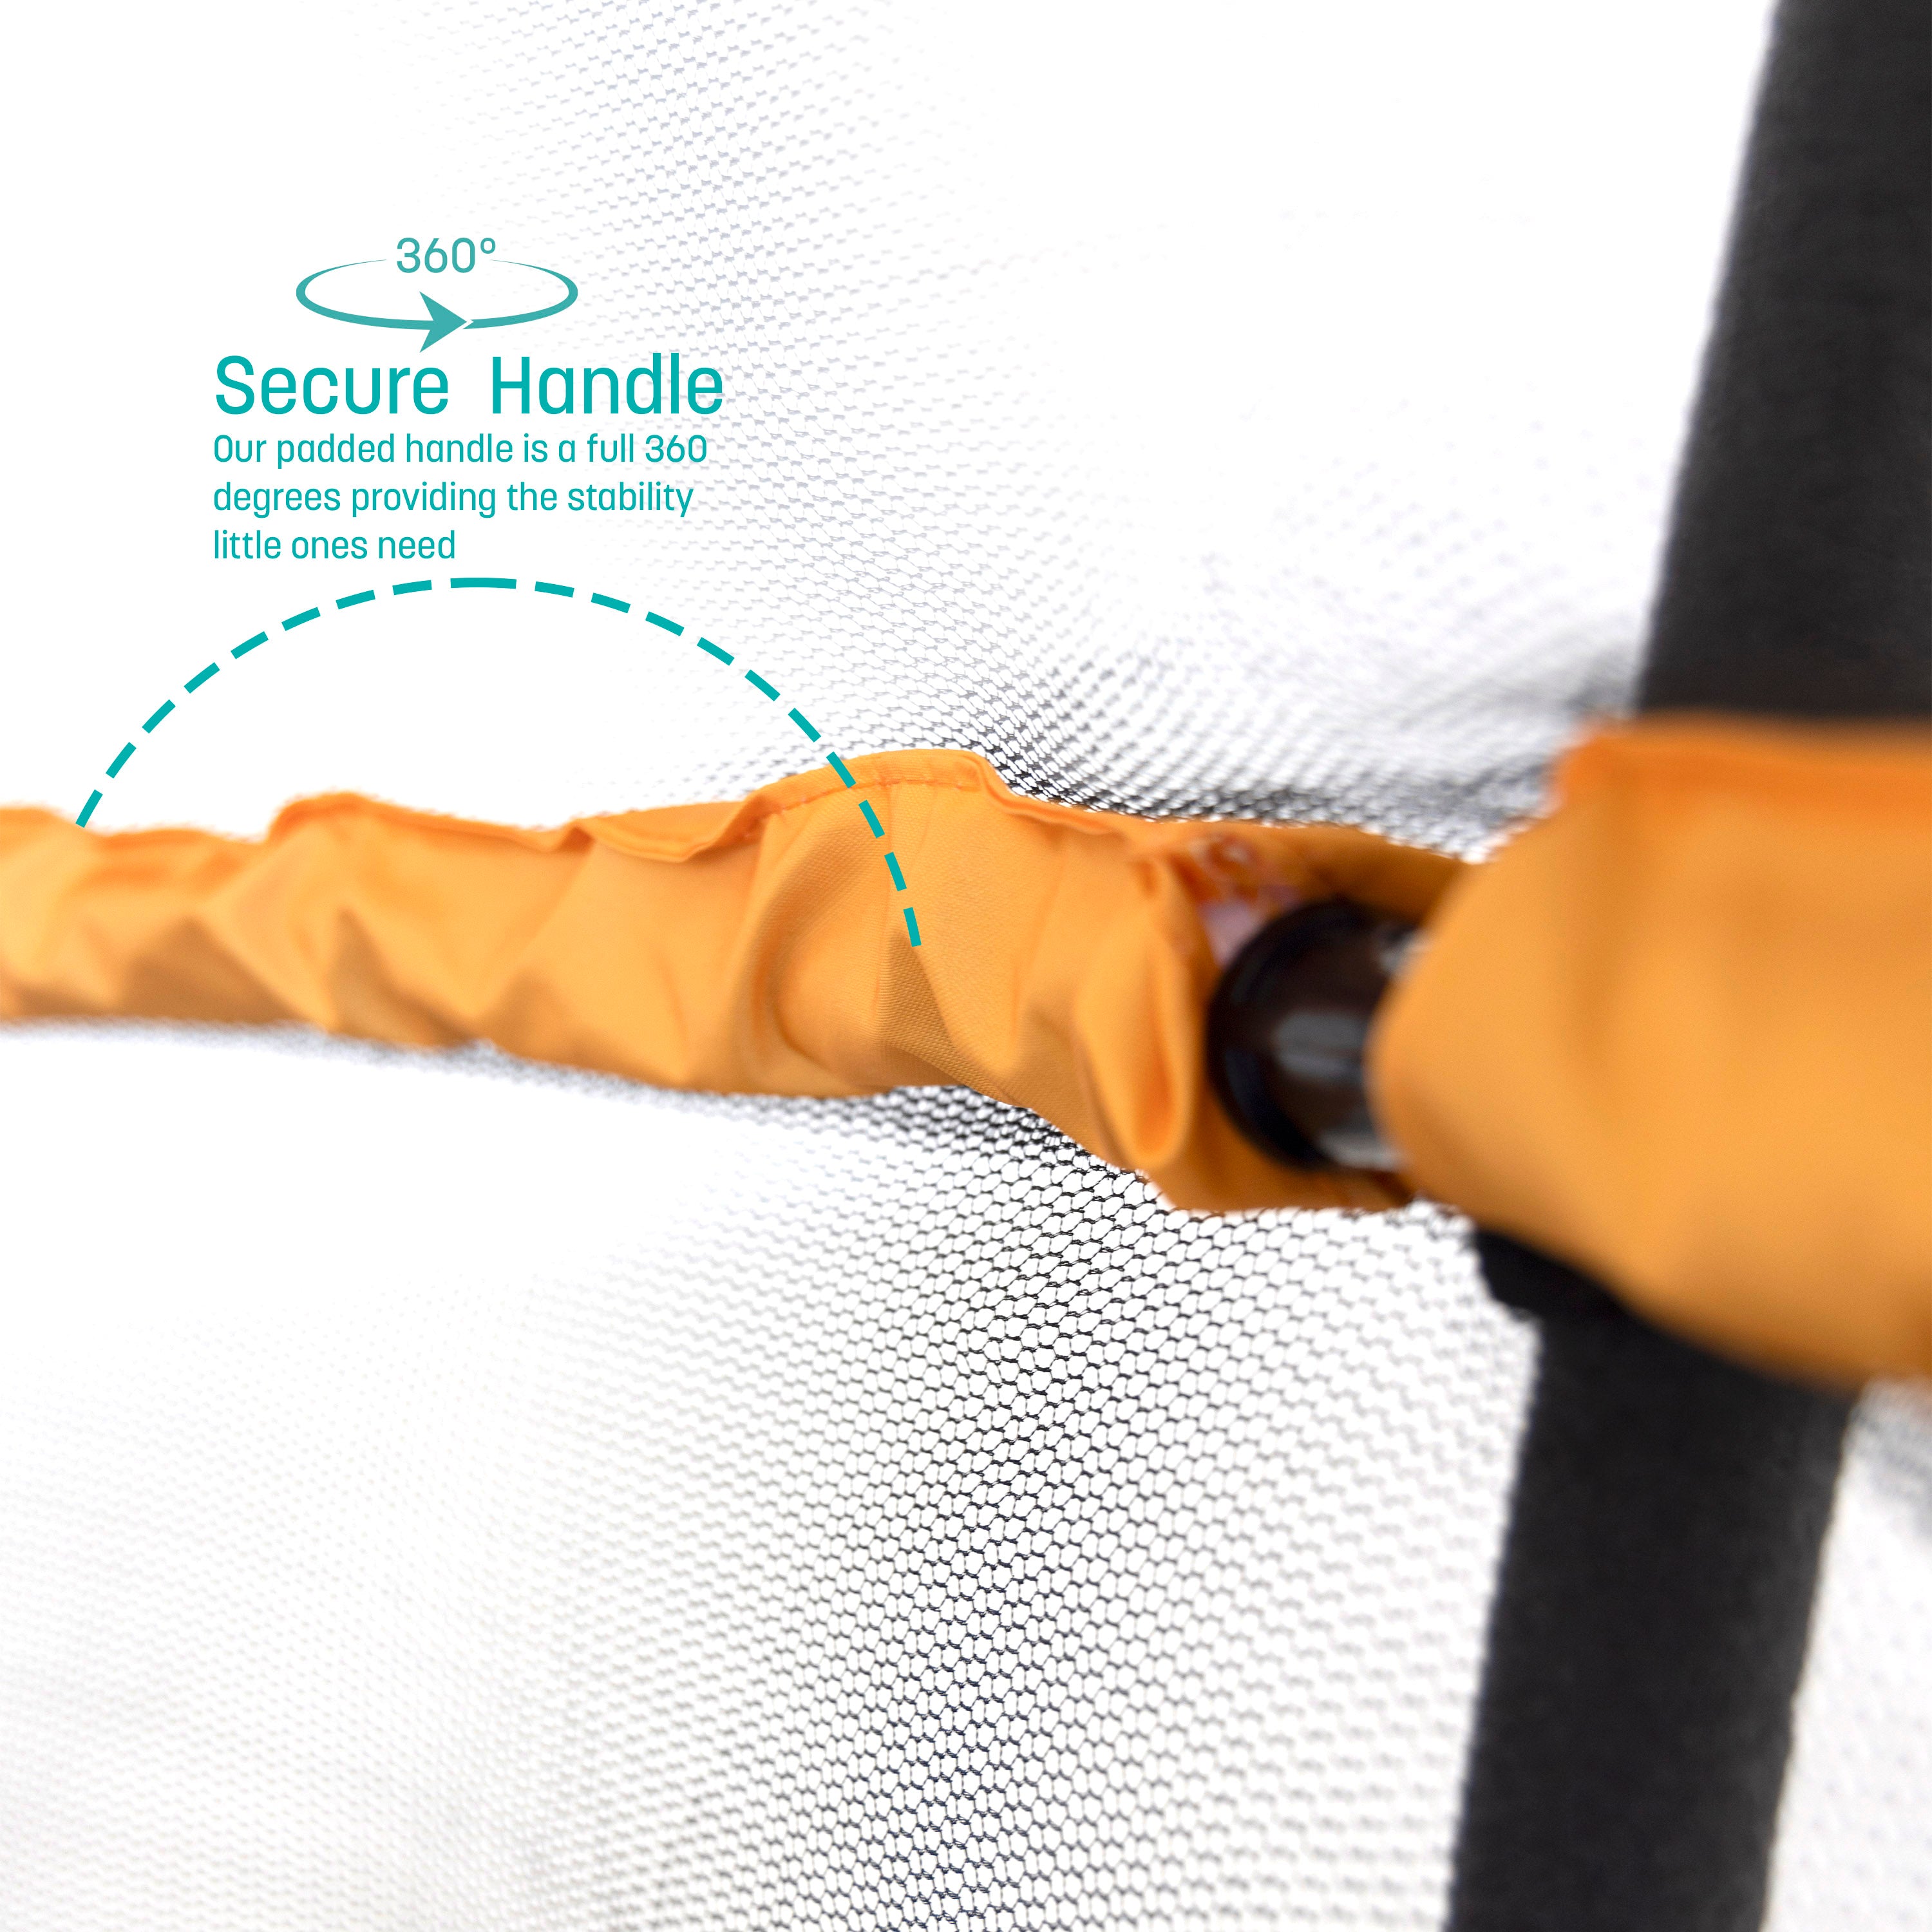 The handlebar has a yellow padded sleeve. A teal callout feature states, “ Secure Handle: Our padded handle is a full 360 degrees providing the stability little ones need”.